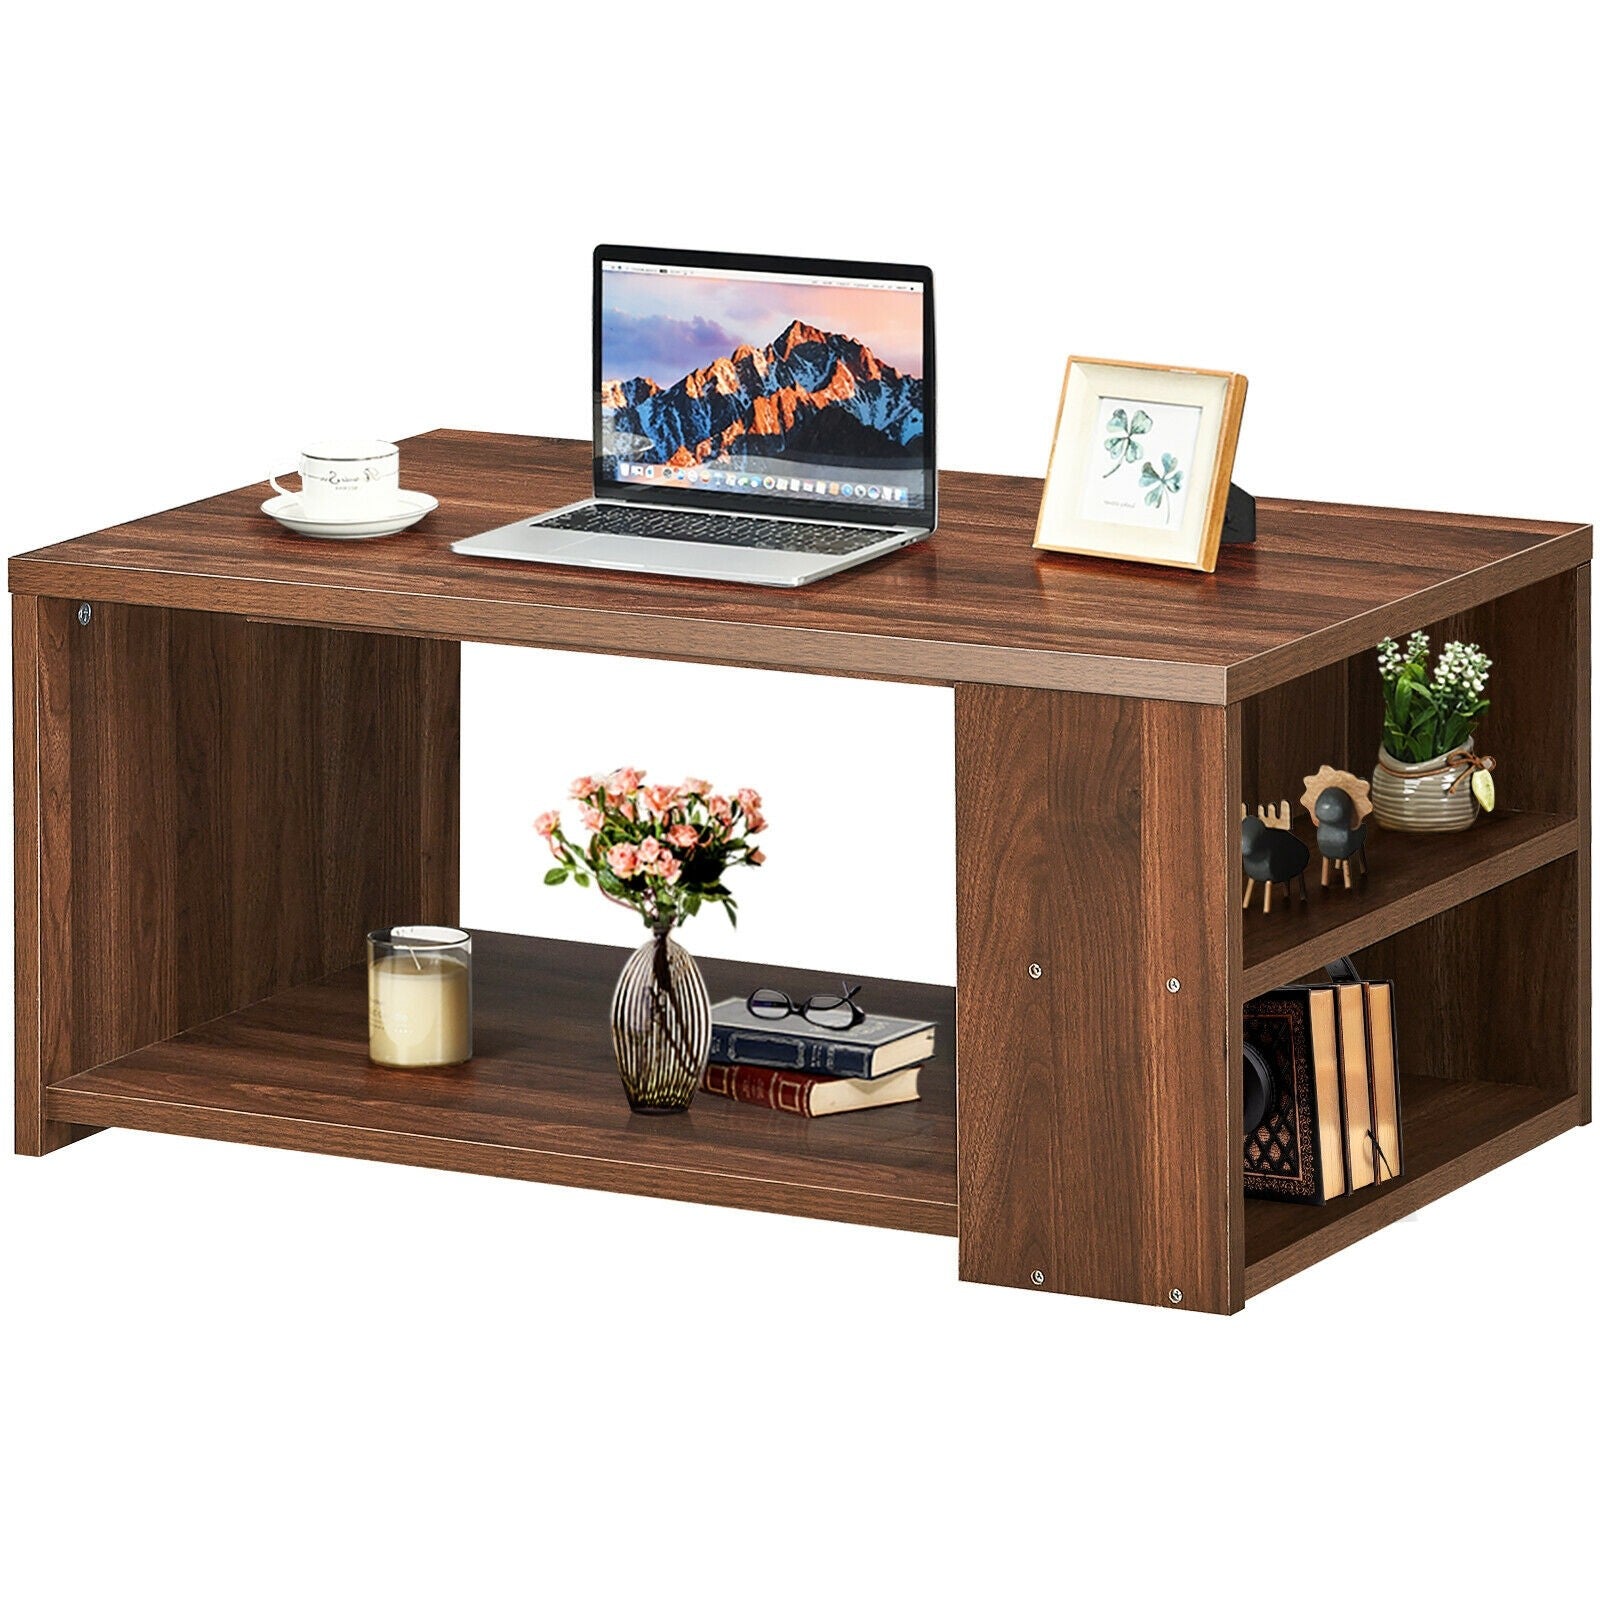 Coffee Table with Storage Shelves Stable Frame,Smooth Surface & Extra Storage Space